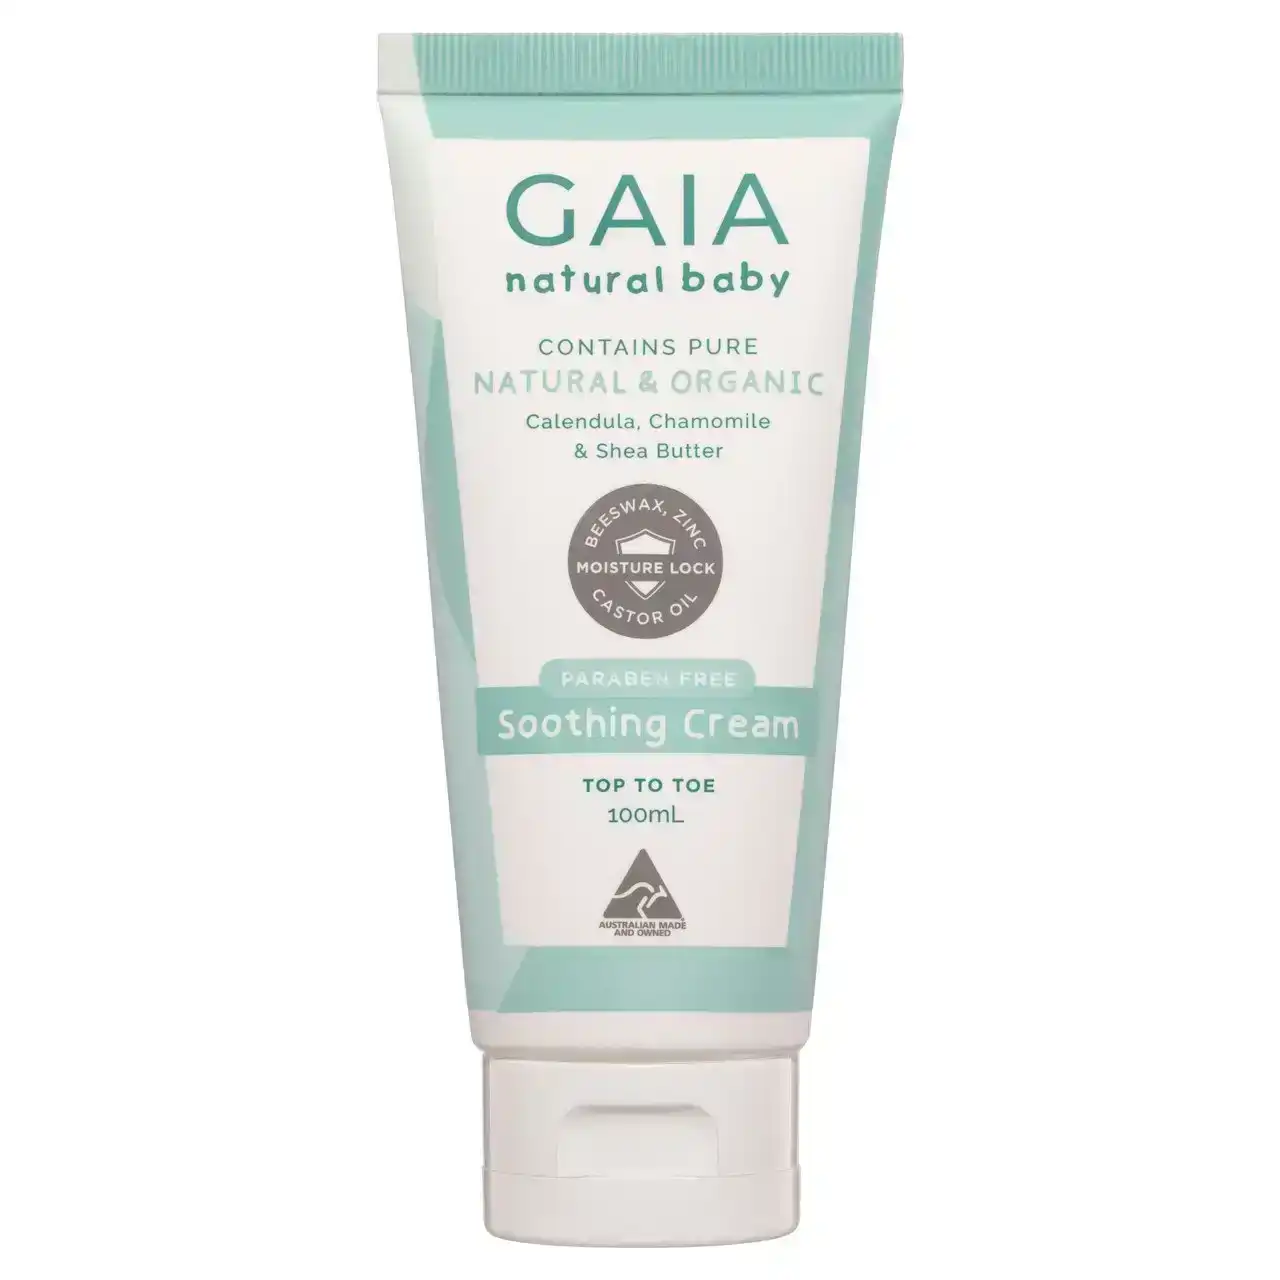 Gaia Natural Baby Soothing Cream 100mL